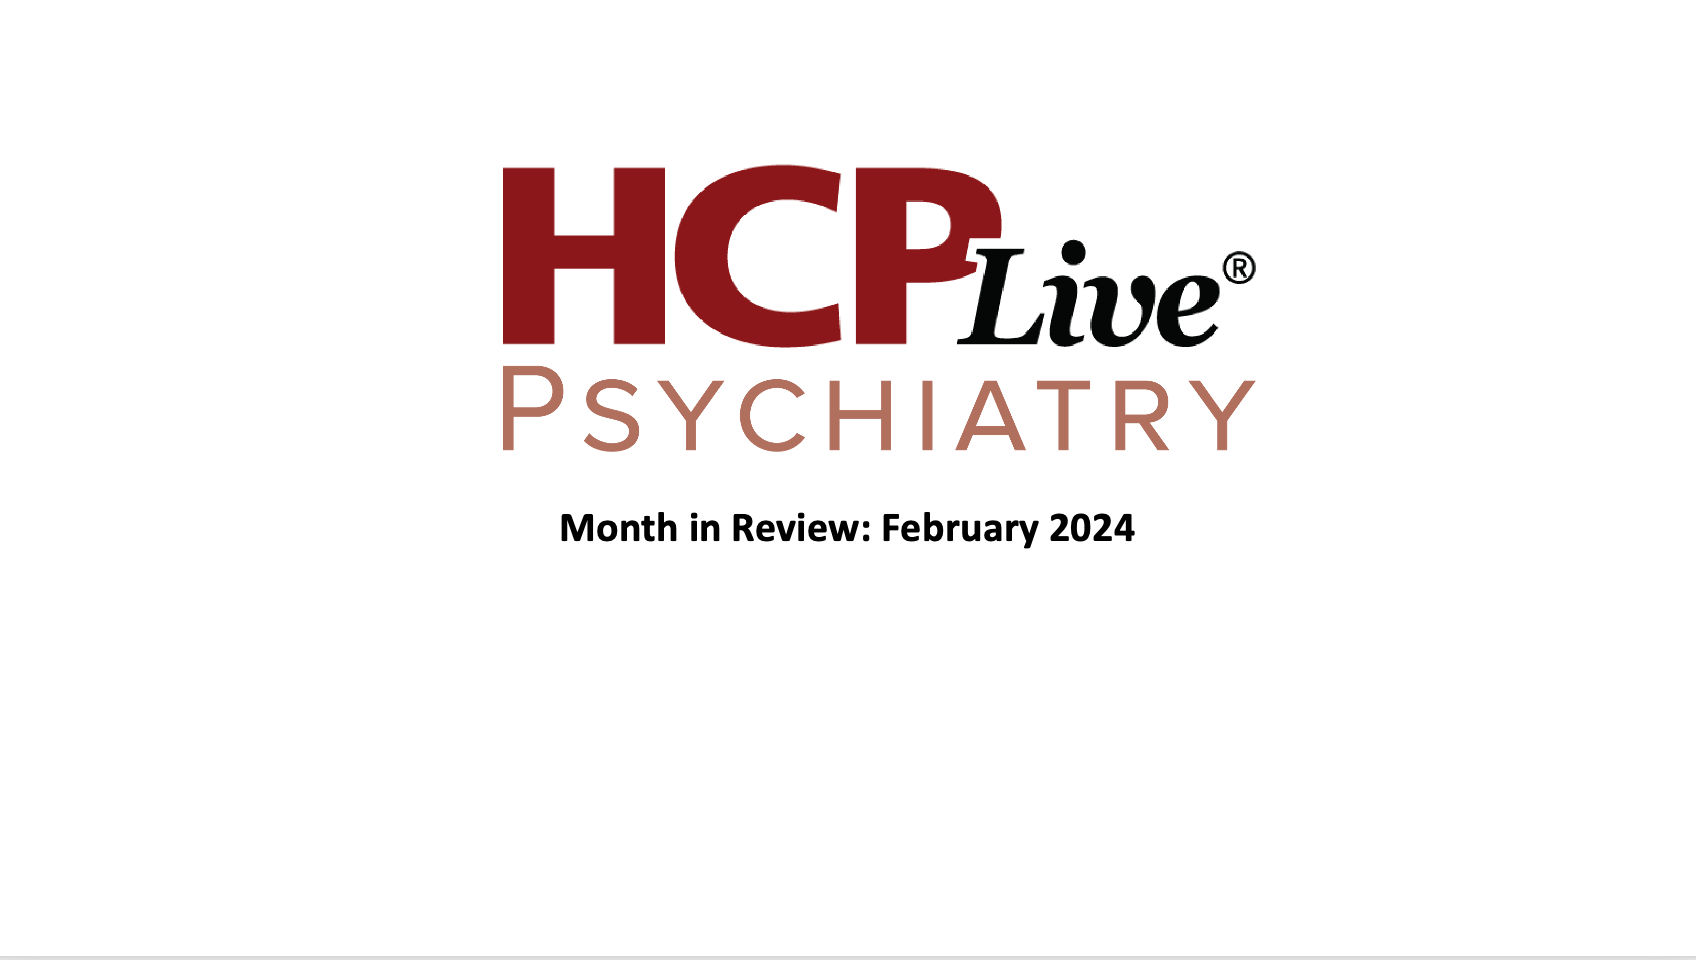 Psychiatry Month in Review: February 2024